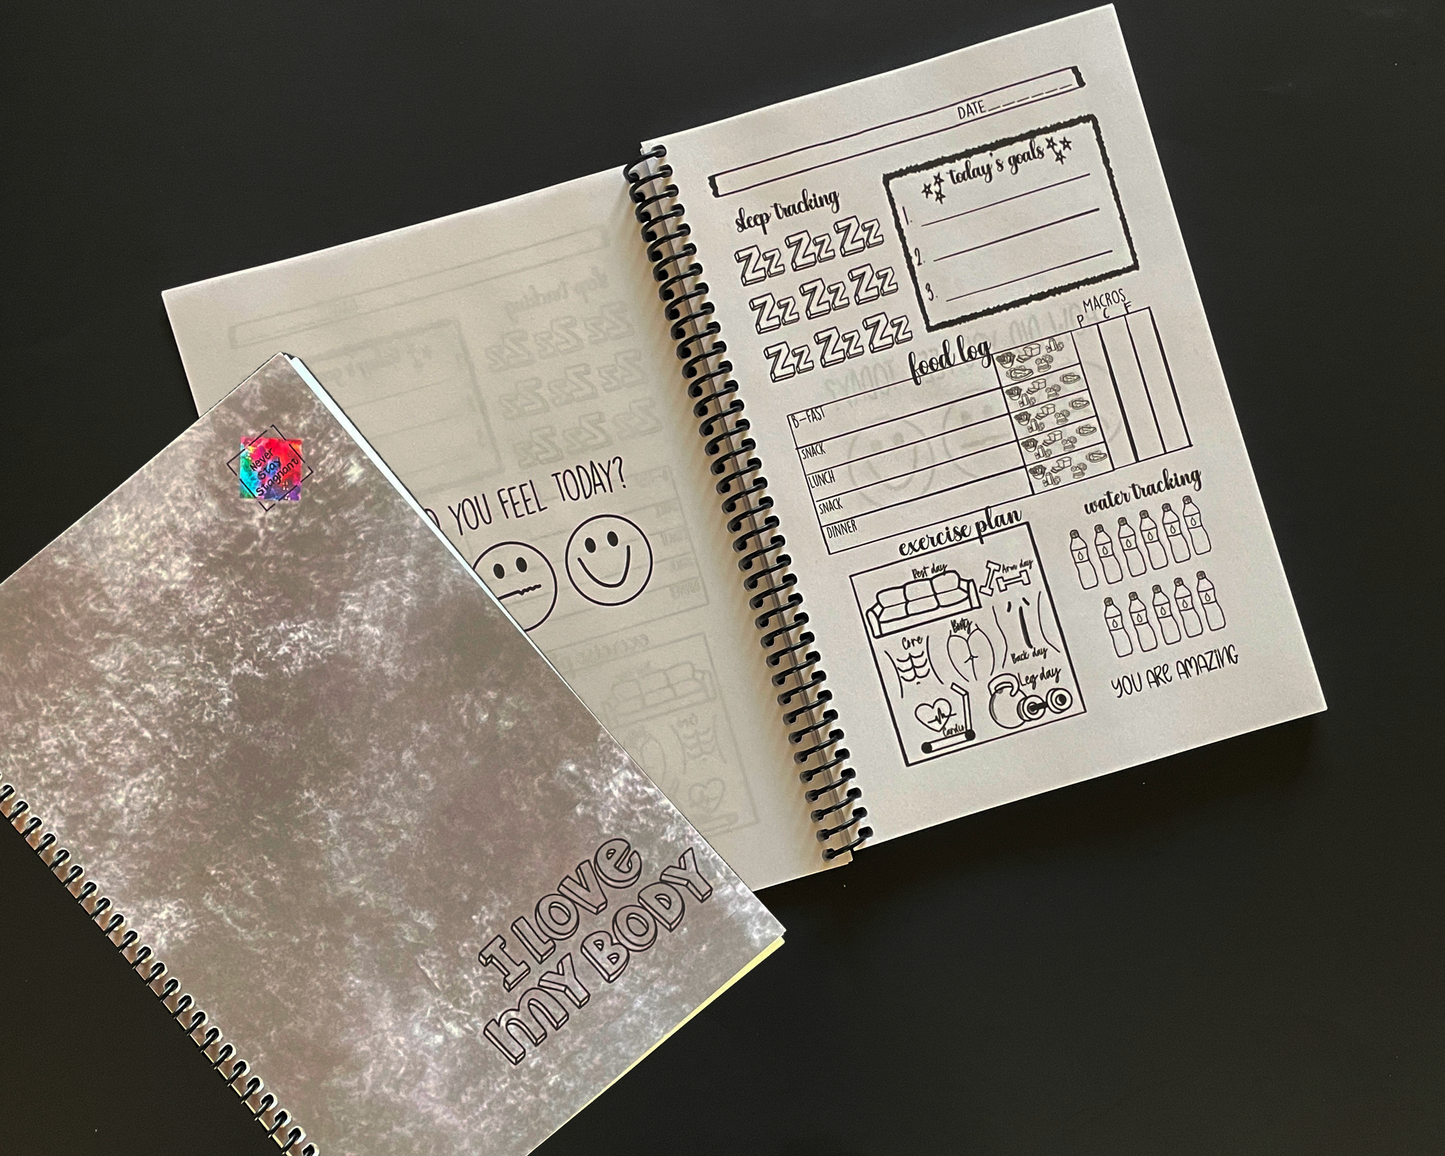 I Love My Body: An Interactive Fitness Journal